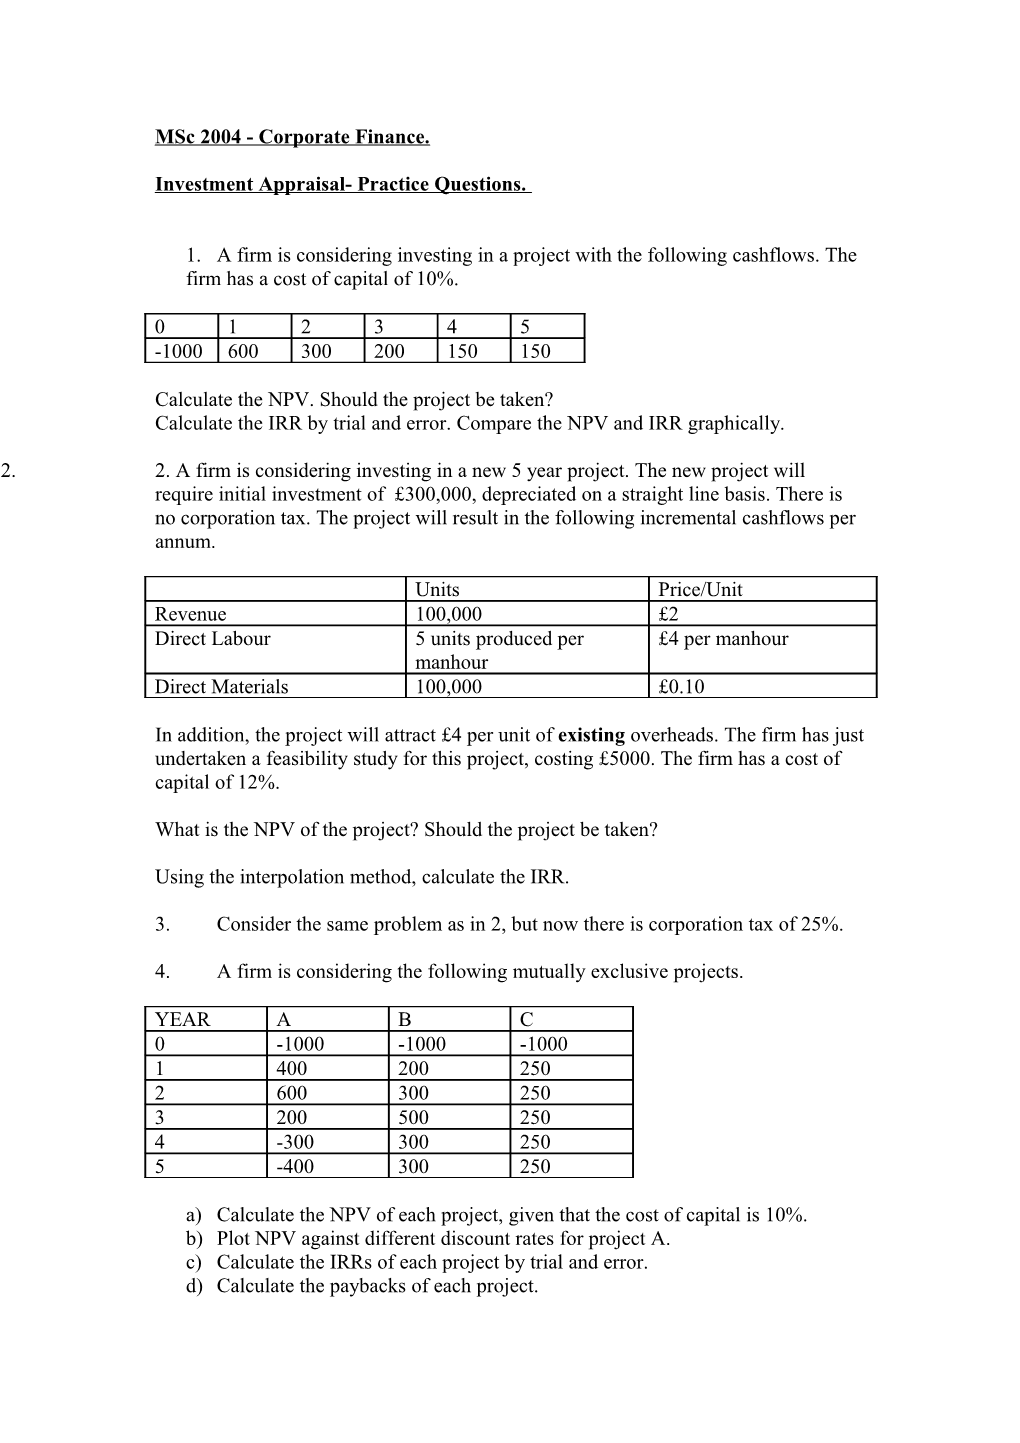 Investment Appraisal- Practice Questions